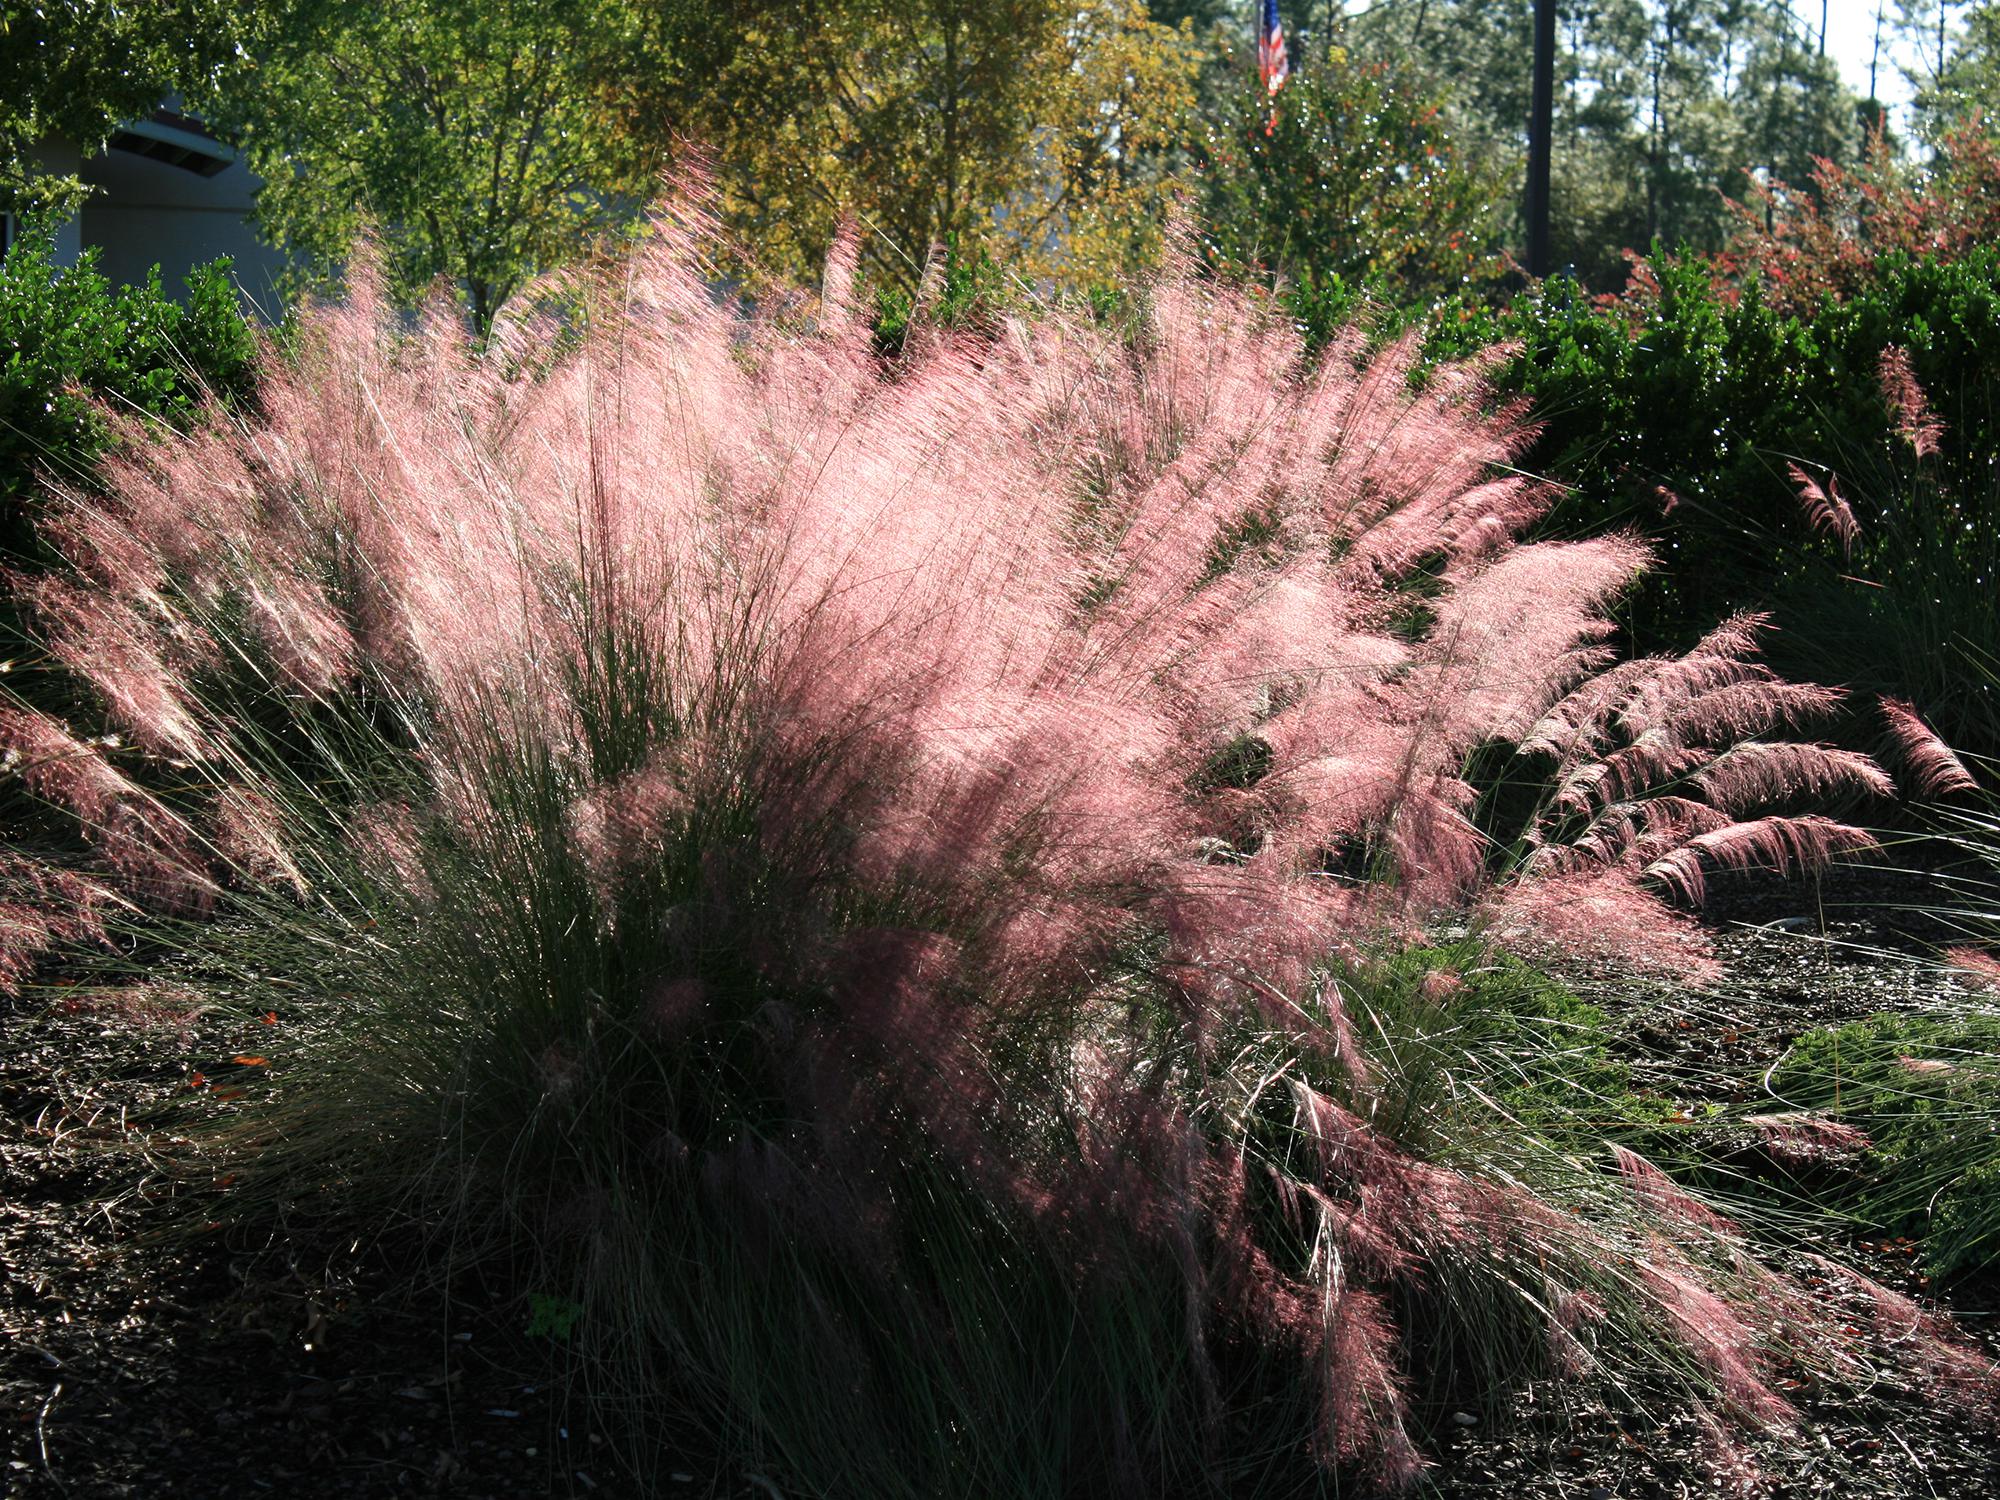 Backlit Gulf Muhly grass glows like a rich, pink cloud in this landscape.